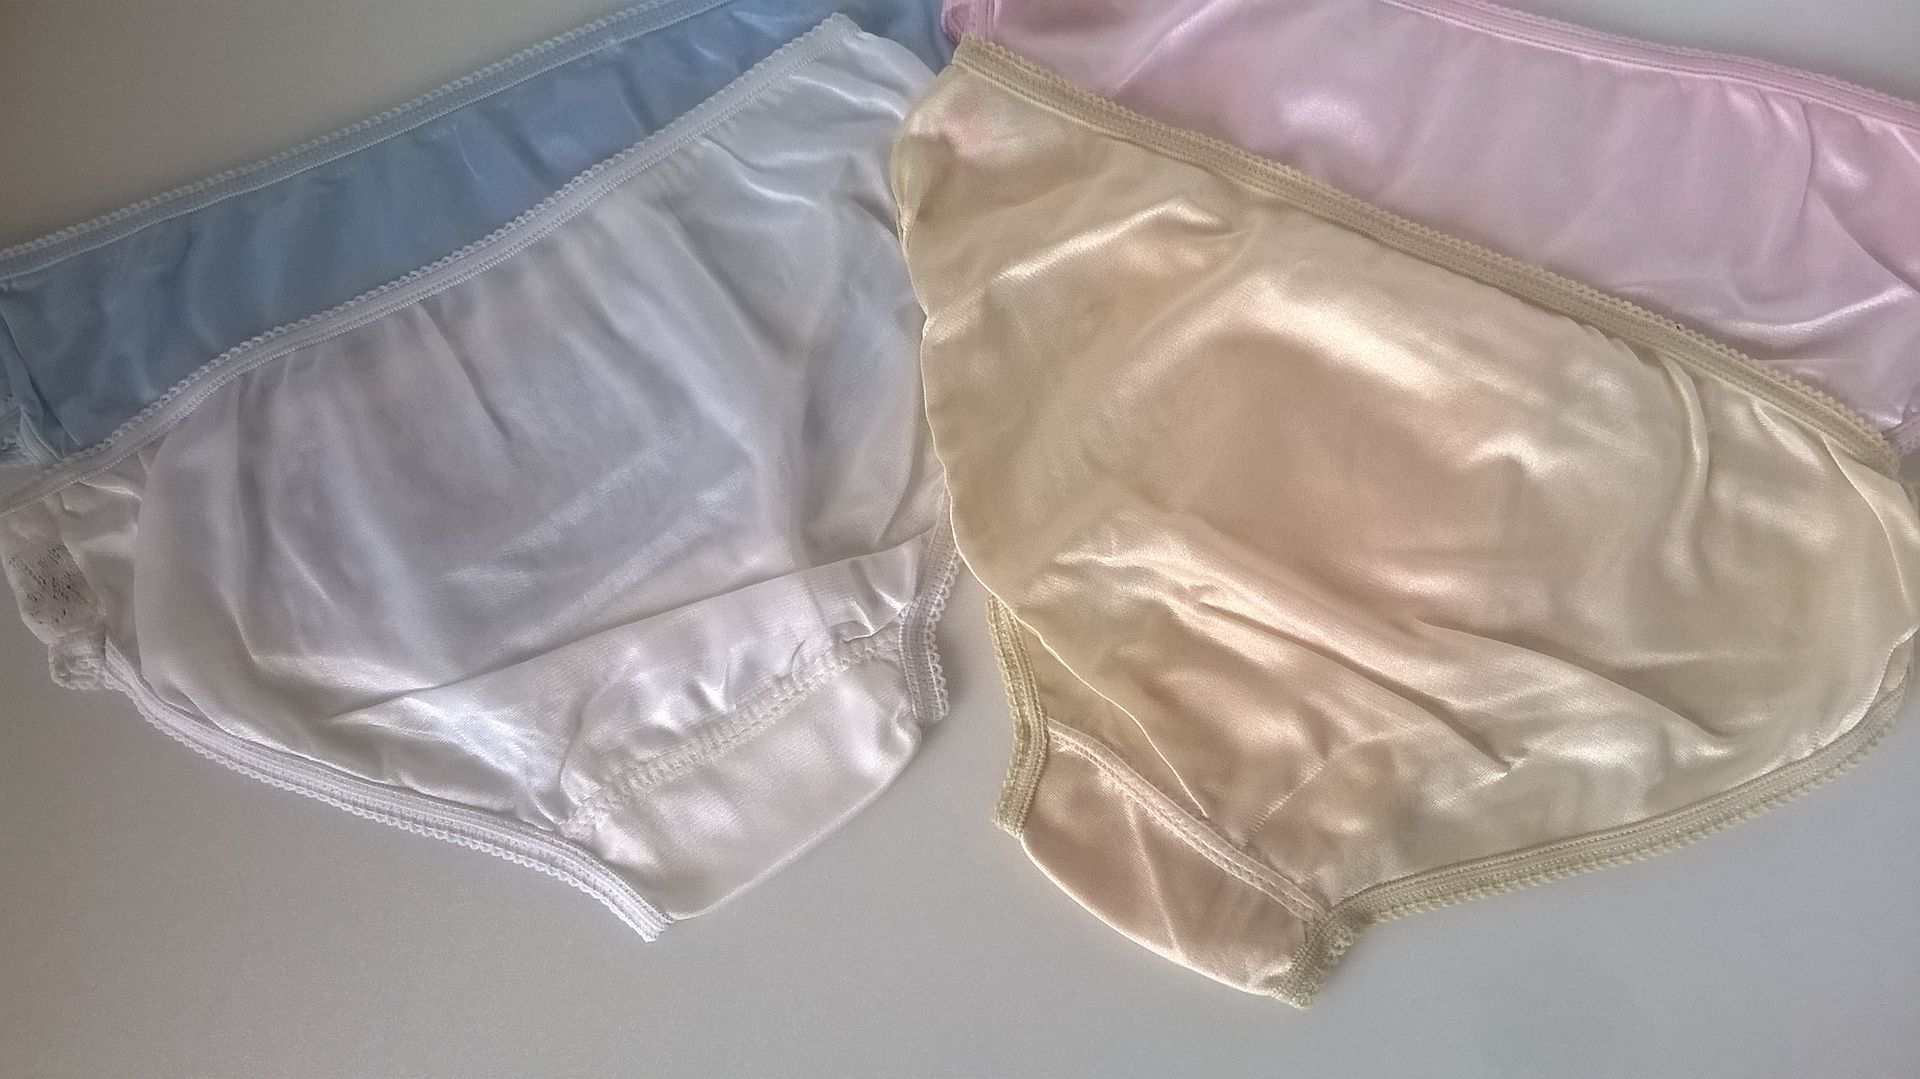 1960s Silky Nylon And Lace Panties Knickers 4 Pack Ladiesteen Girls S 